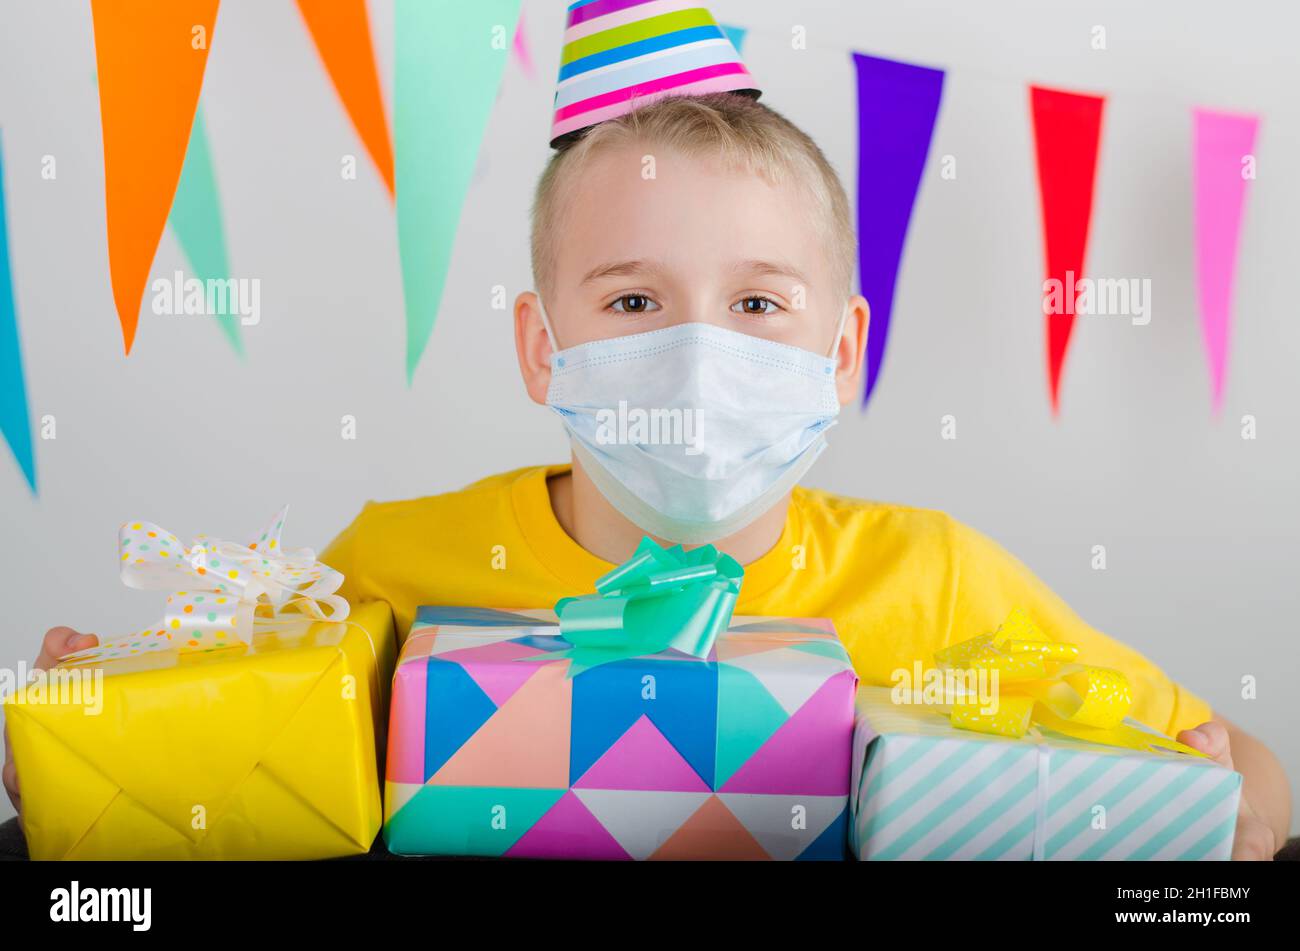 Happy boy in medicine face mask and festive cap with gifts in hand celebrates birthday. Quarantine birthday alone in isolation. Social distance. Stock Photo